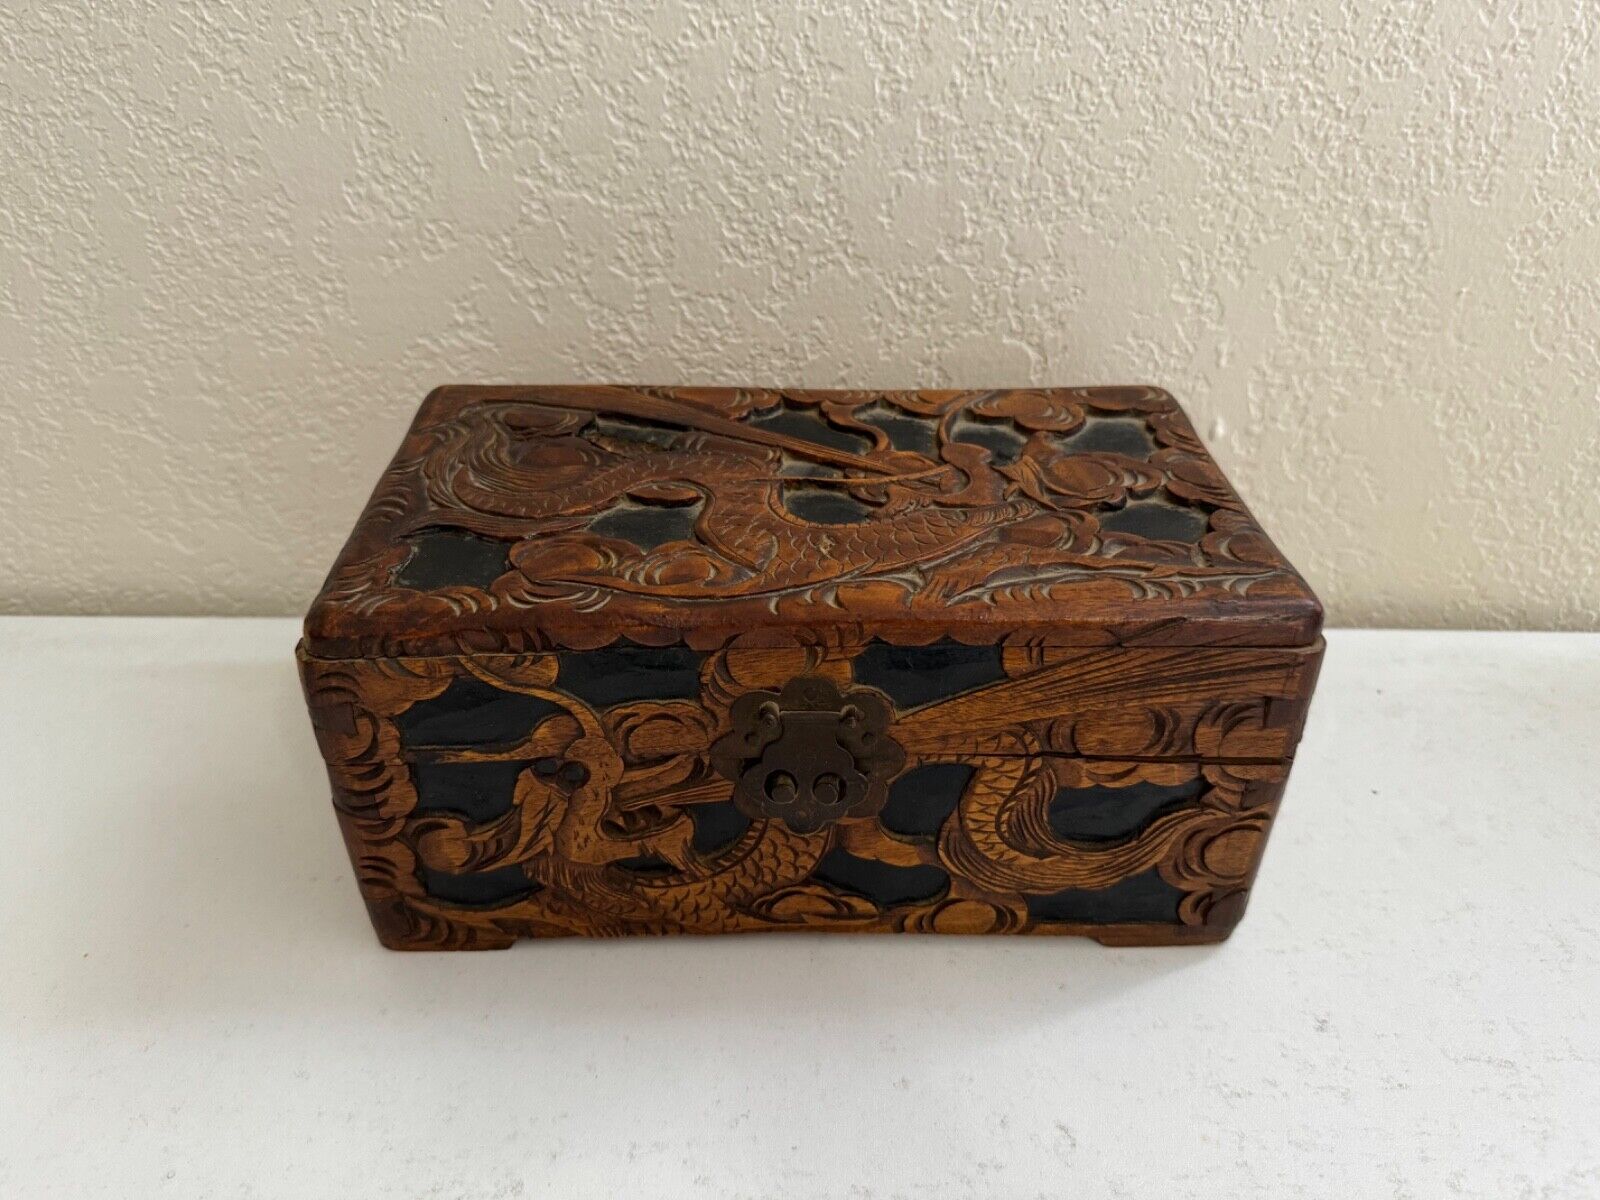 Vintage Southeast Asian Carved Wood Box w/ Dragons Design